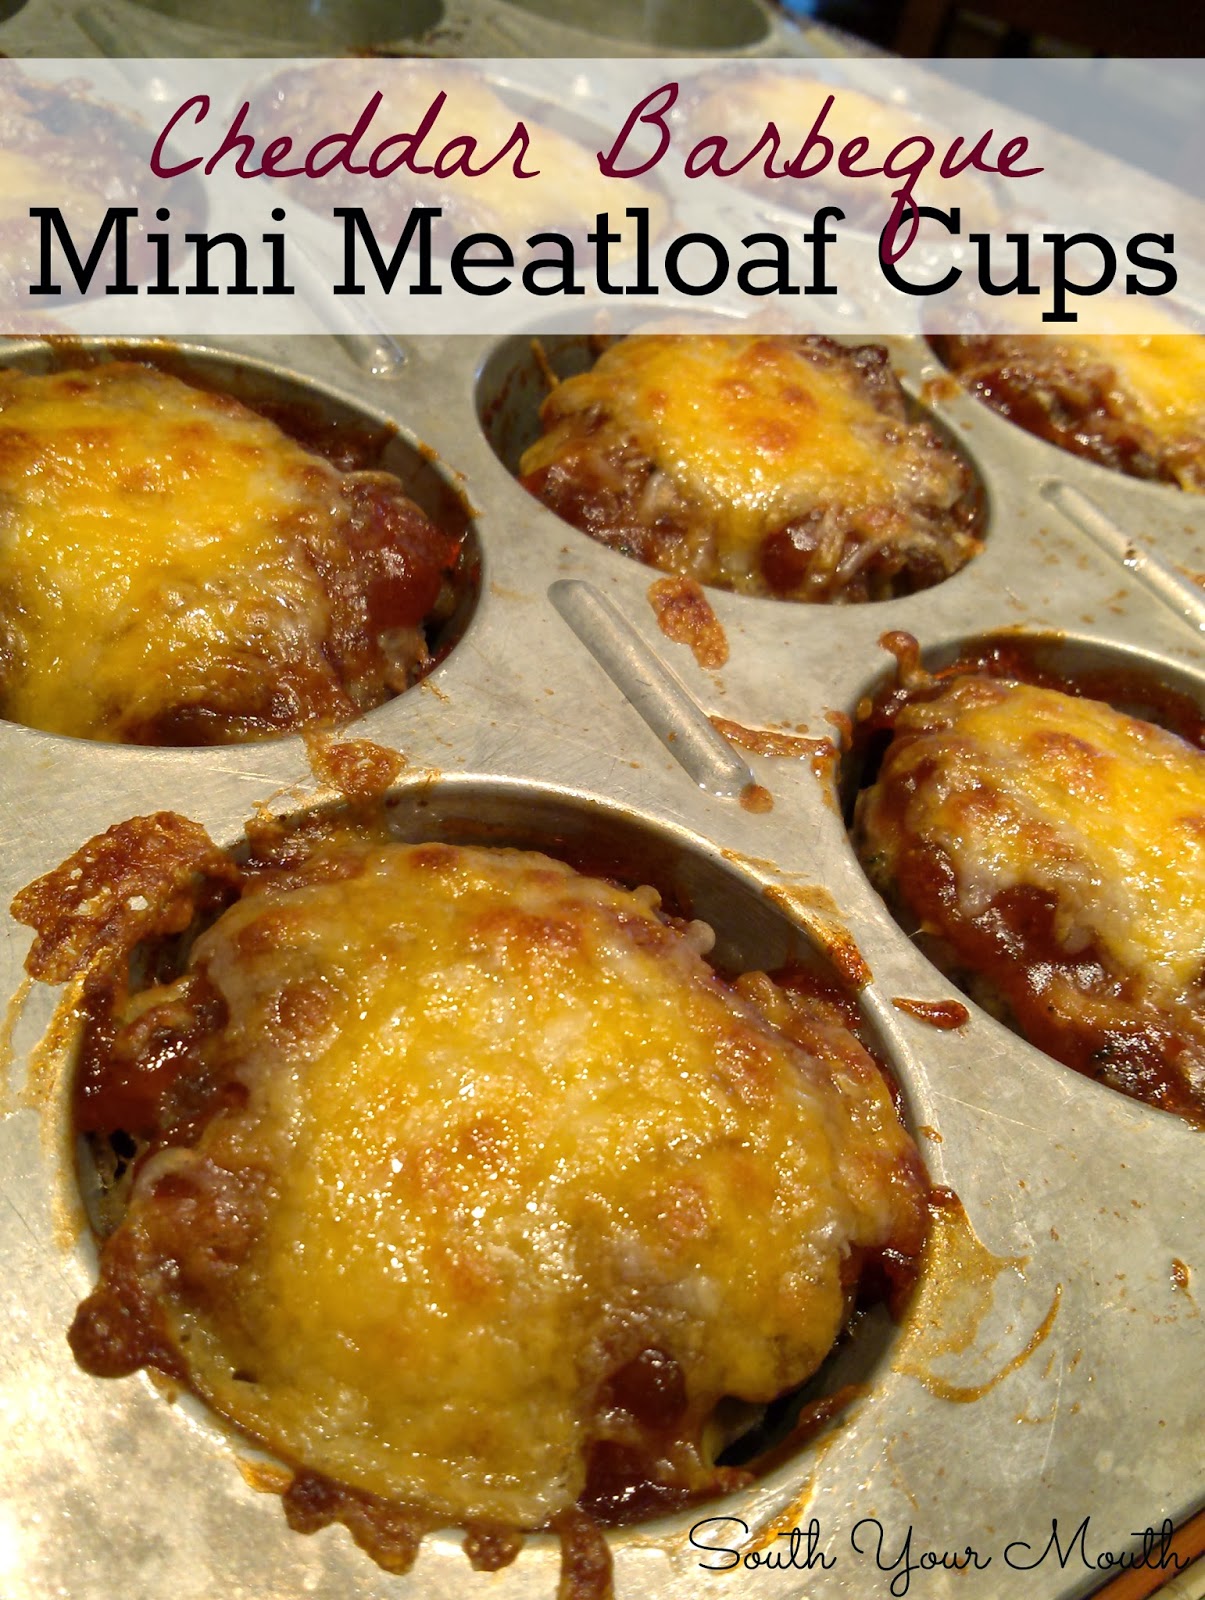 South Your Mouth: Cheddar Barbeque Mini Meatloaf Cups